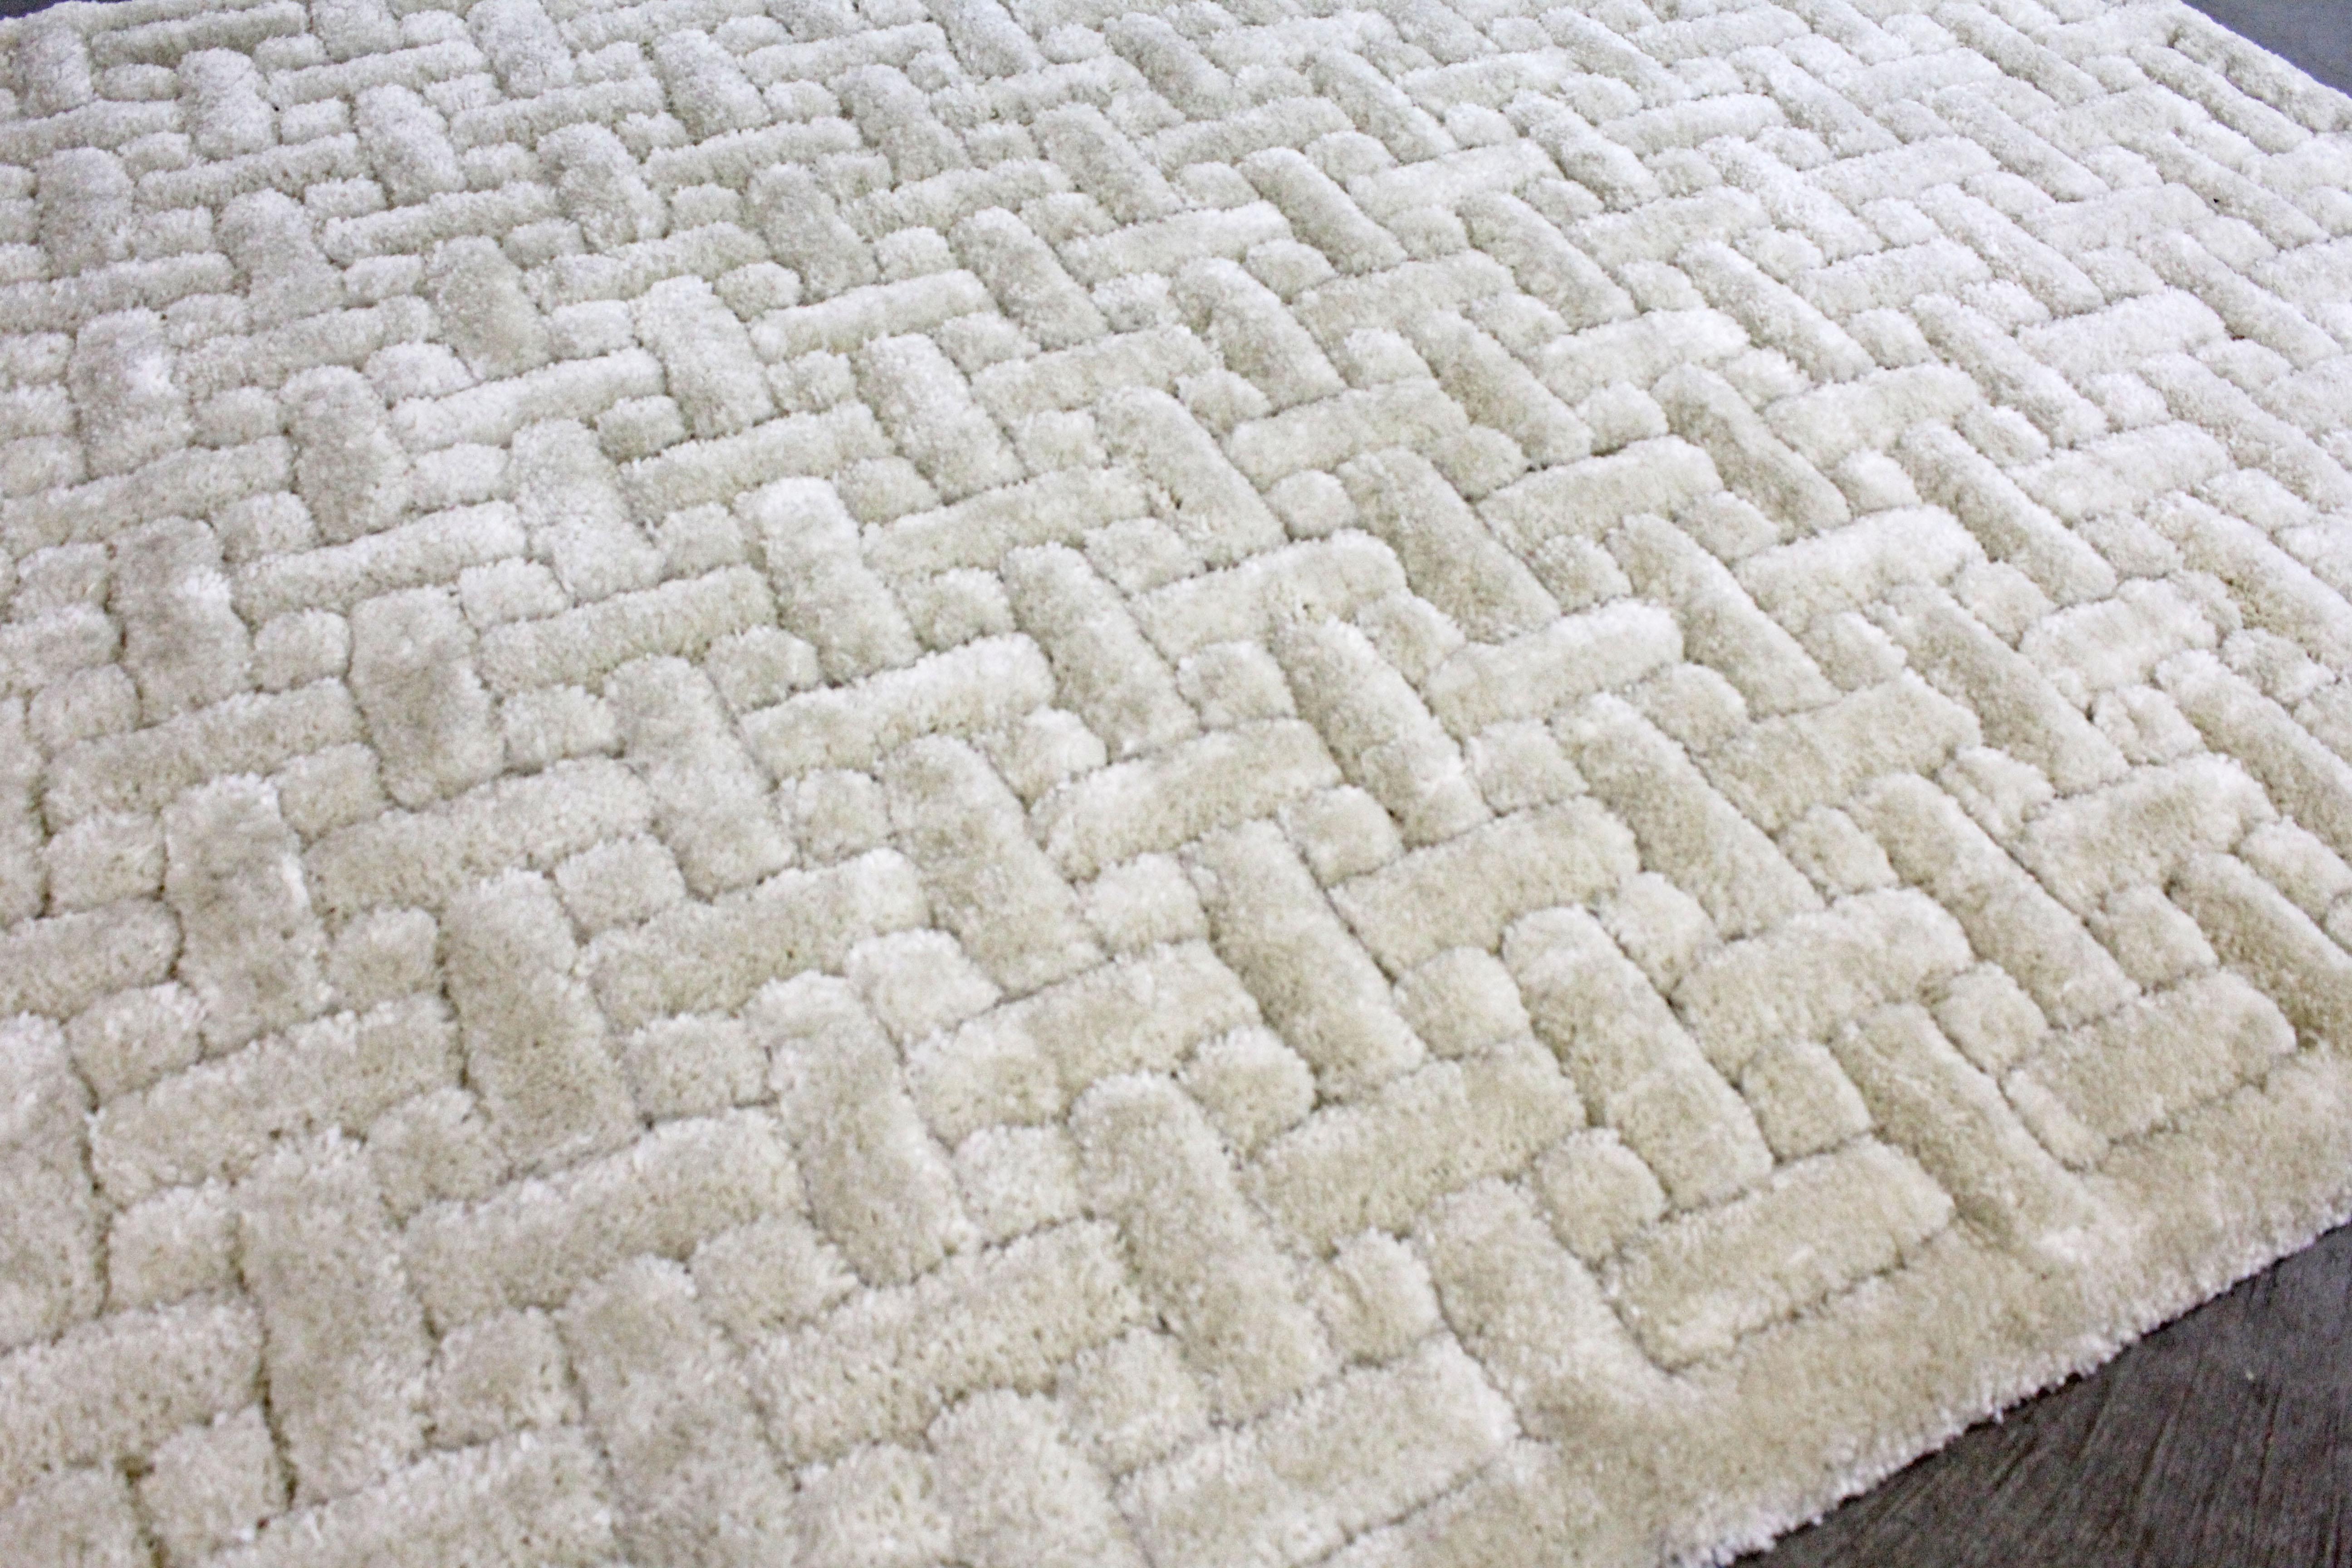 Offered is a Mid-Century Modern style off-white room size rug with a geometric pattern design. This piece is quite thick, approximate 1.5